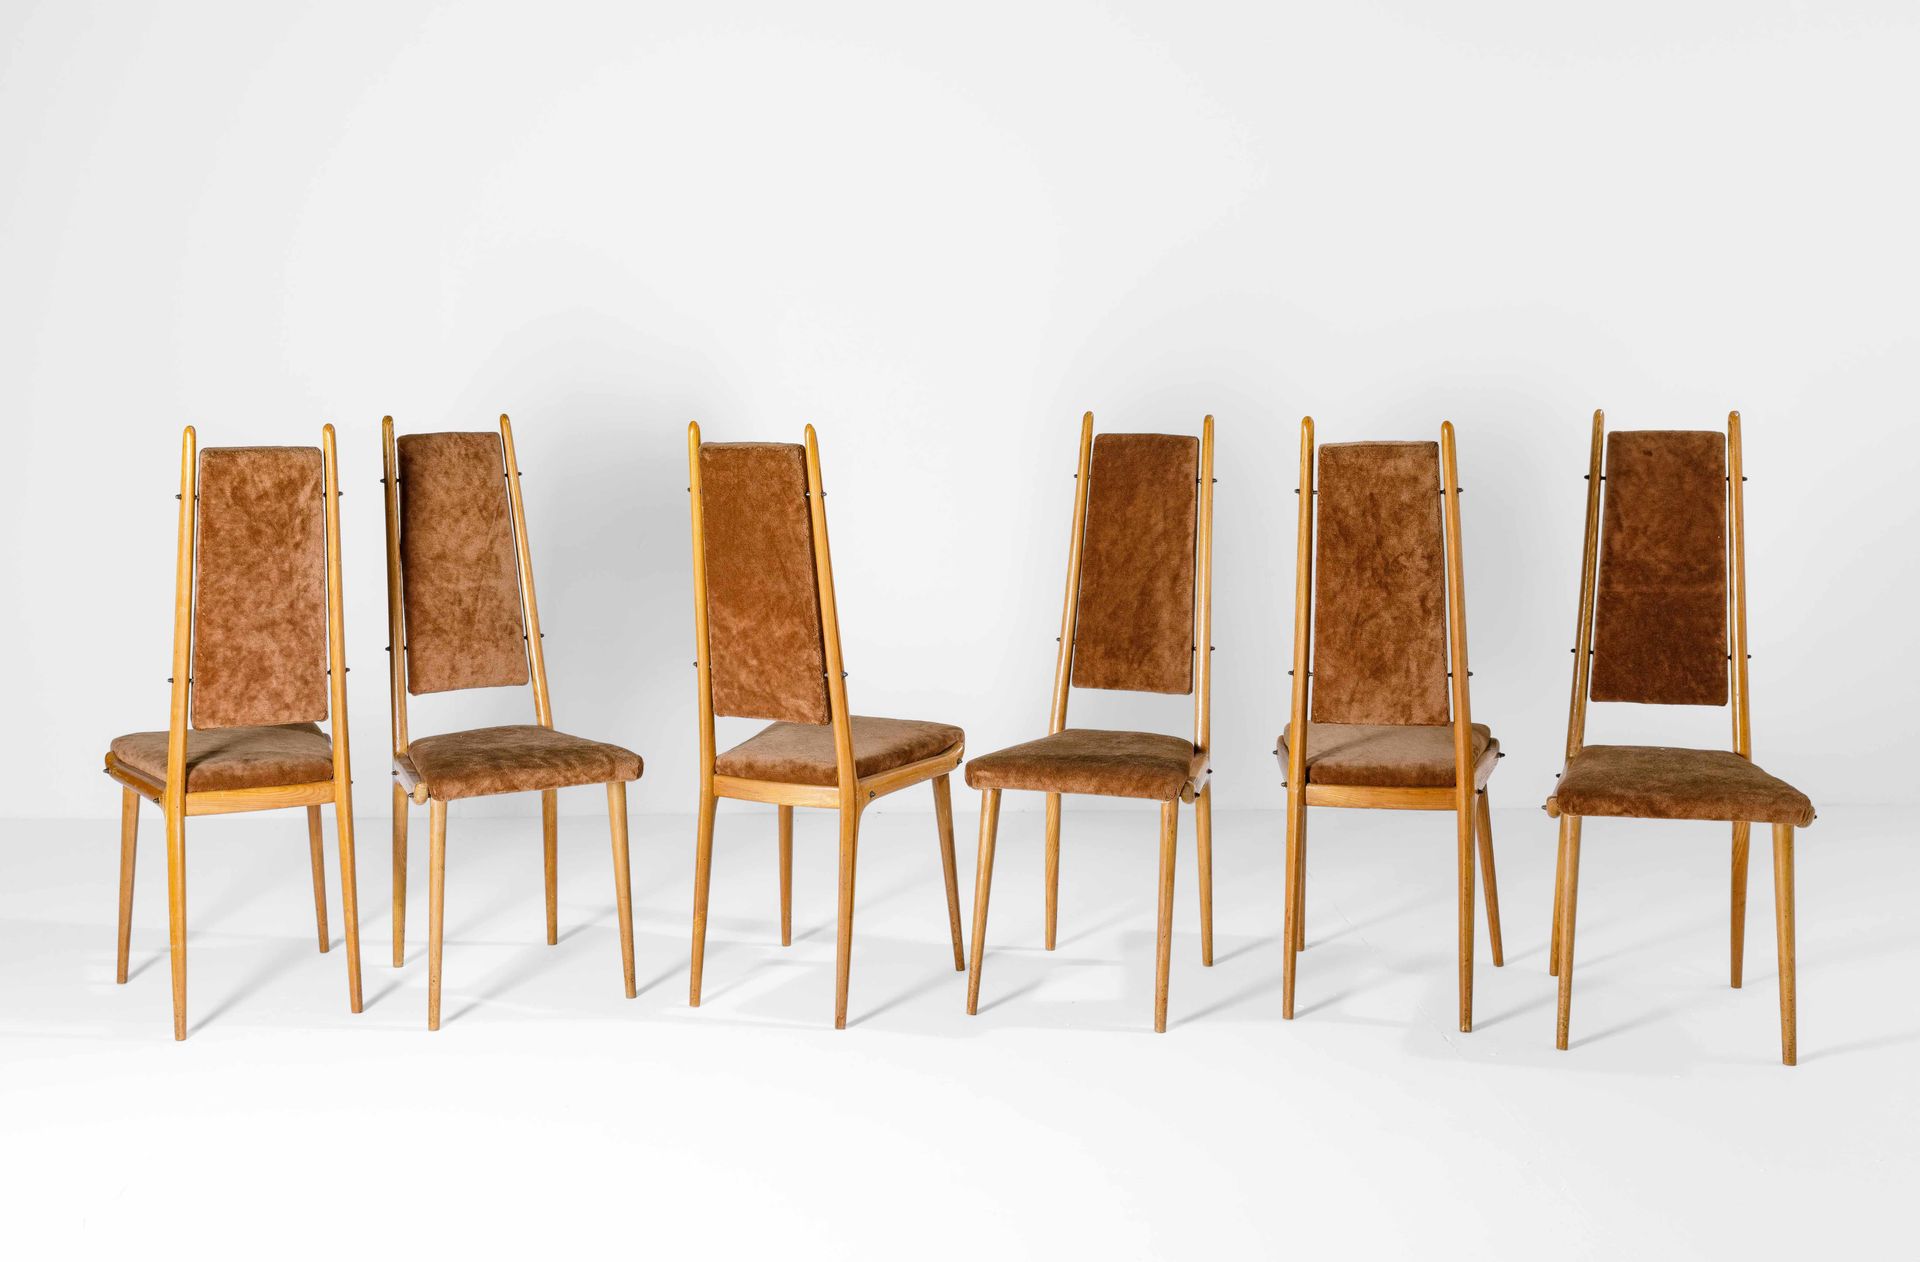 Apelli e Varesio, Six chairs with wooden frame and fabric covers. Certificate of&hellip;